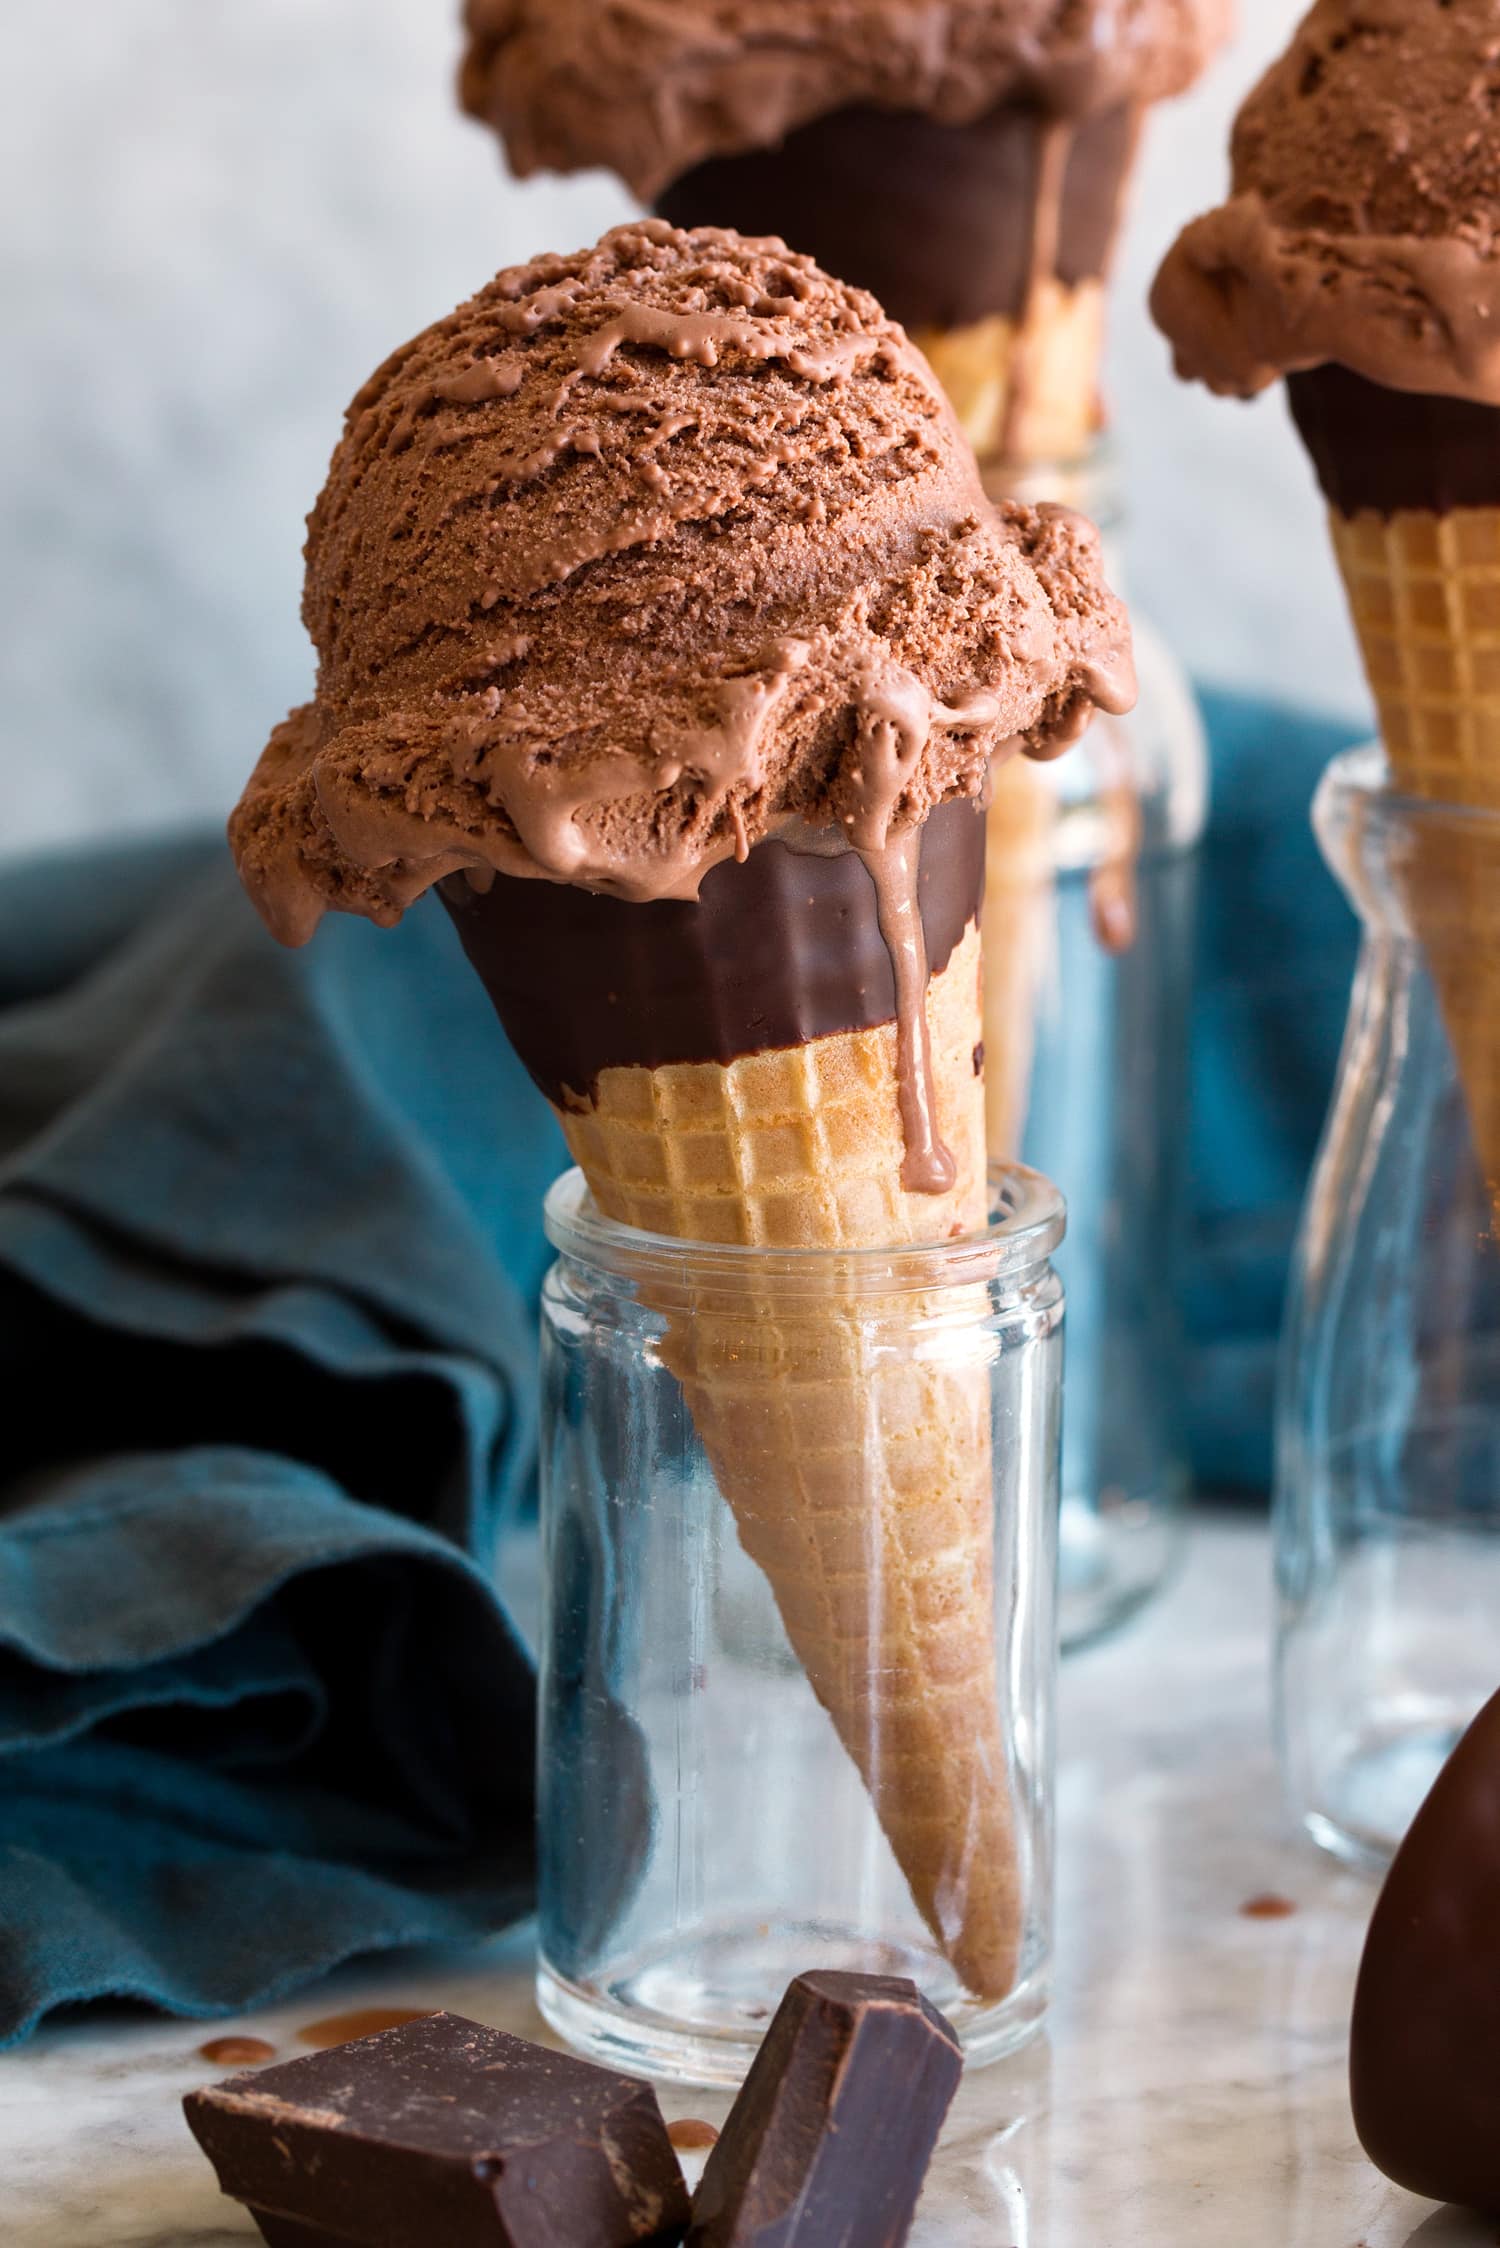 Scoop of homemade chocolate ice cream shown on a chocolate dipped ice cream cone.